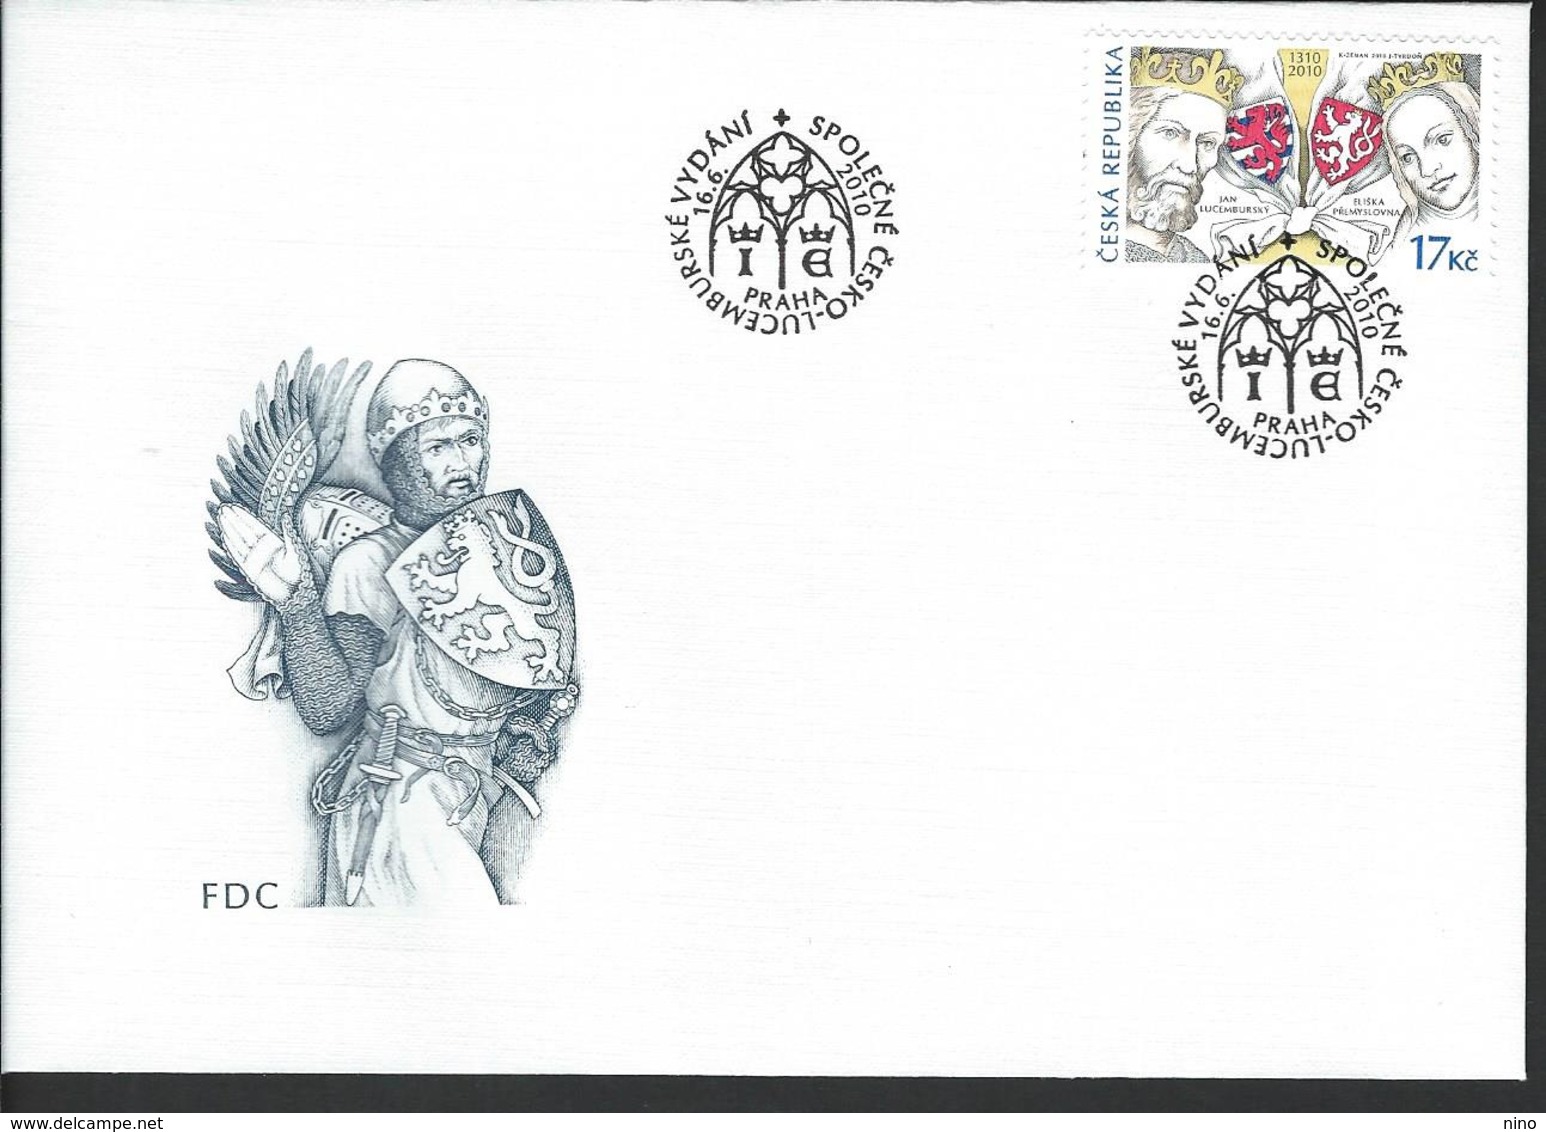 Czech Republic. Scott # 3457 FDC. 70th. Anniv. Accession To Throne. Joint Issue With Luxemburg 2010 - Joint Issues